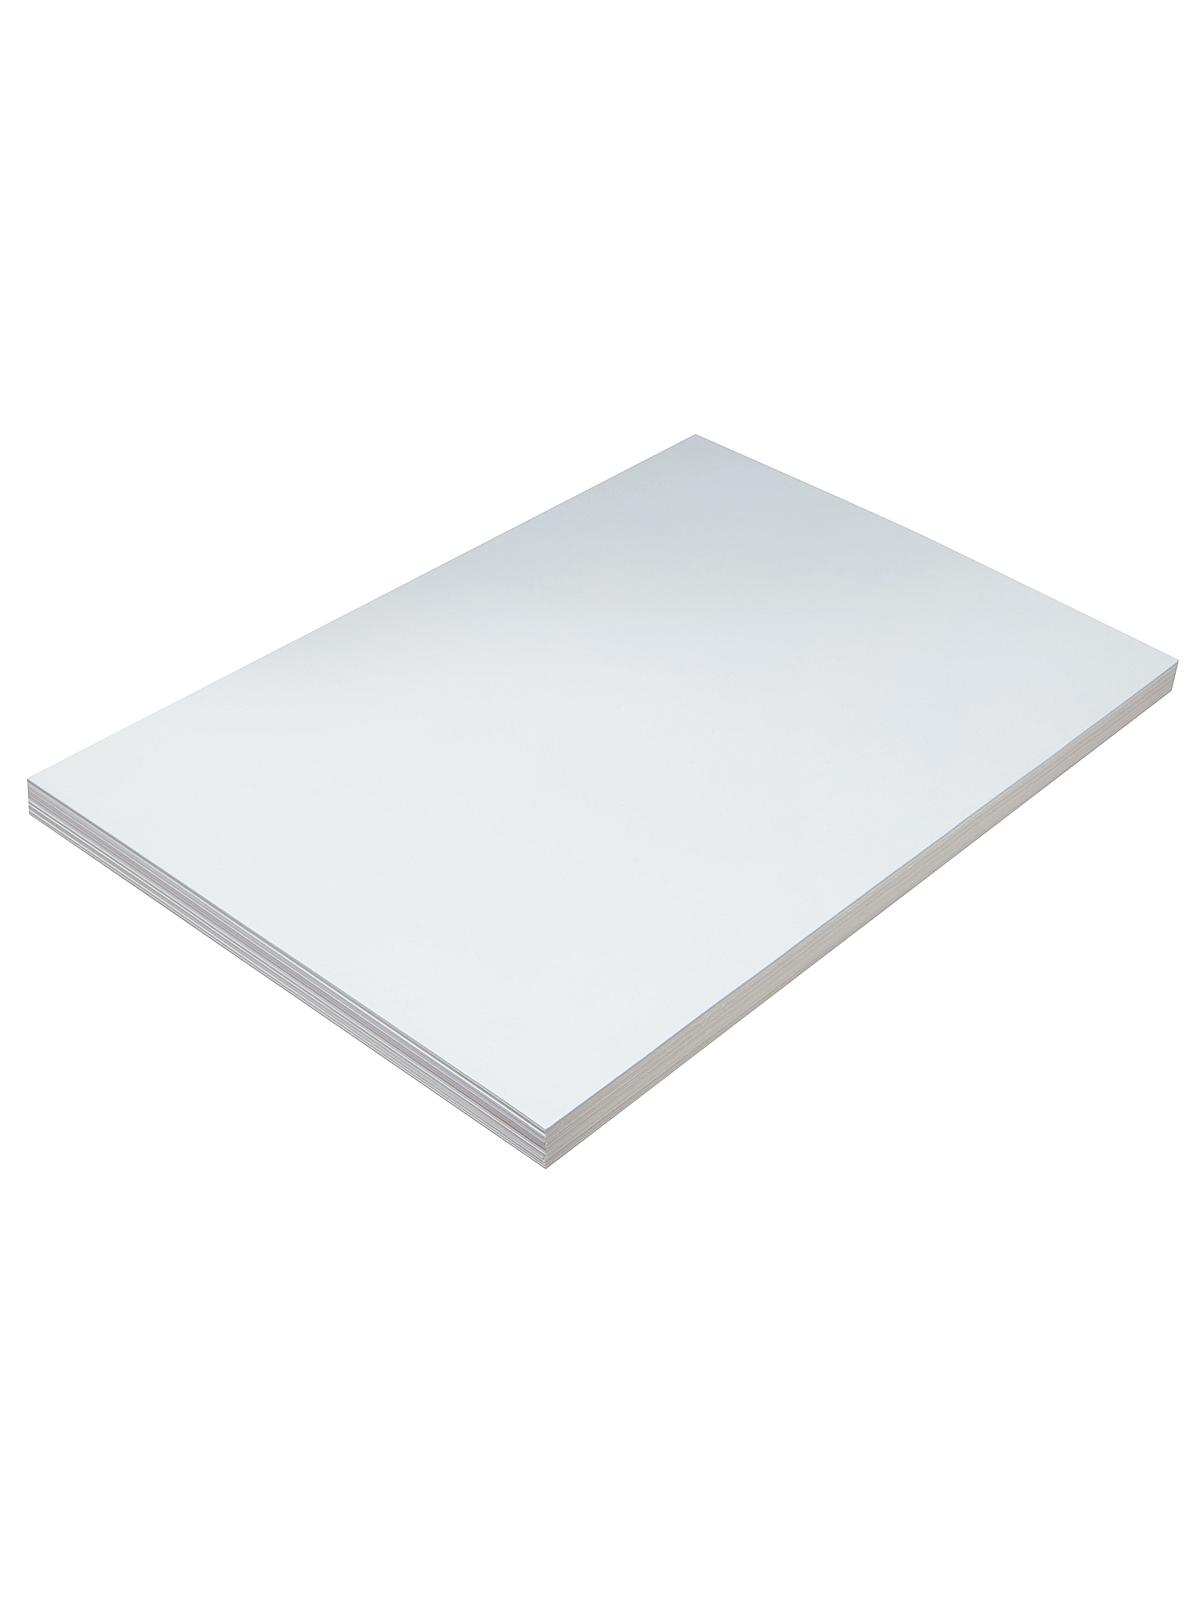 Tagboard 12 In. X 18 In. Light Pack Of 100